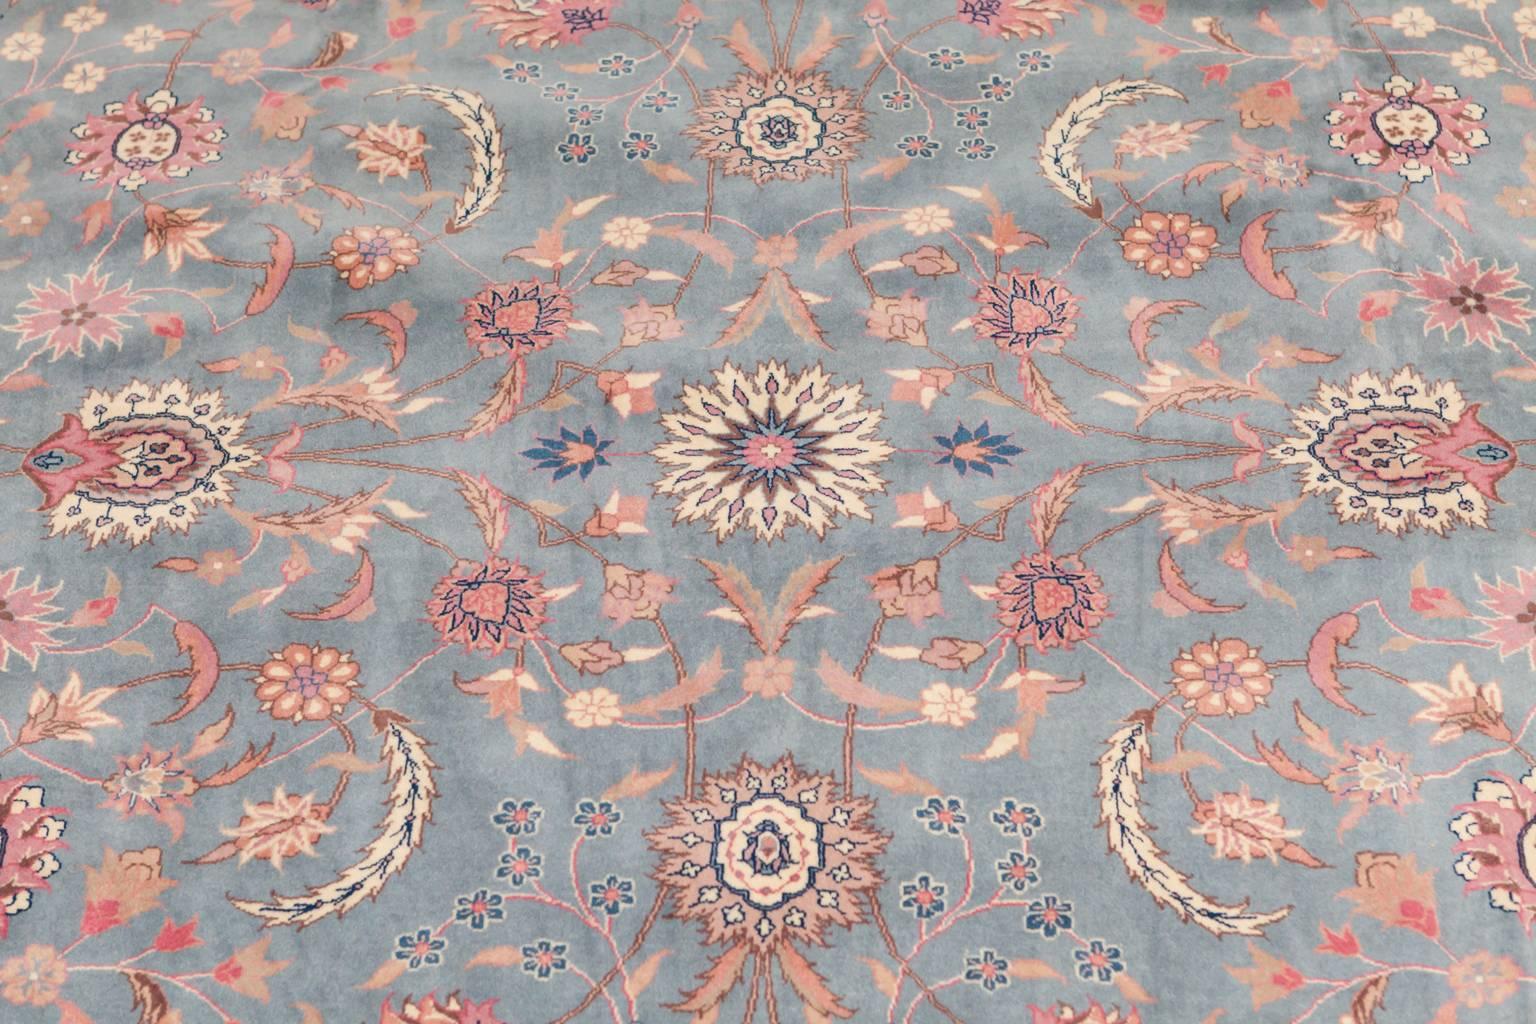 Spectacular powder blue Indian Agra rug featuring vines and floral motif on a rare light blue ground with a cream border. Highly sought after Agra rugs are extremely well made and feature a long pile making them durable and heavy. This whole room